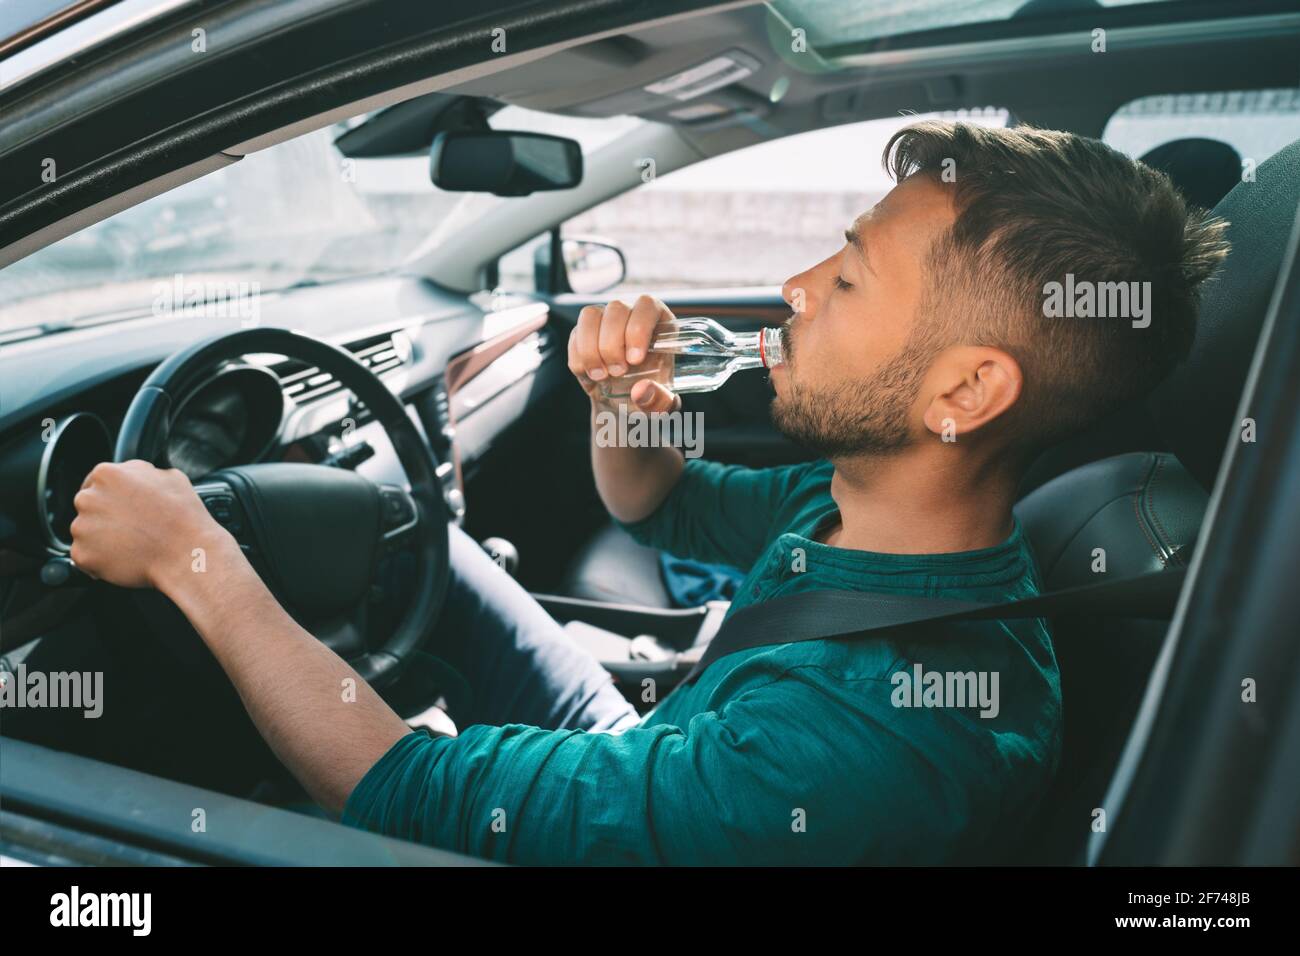 Driving under alcohol influence. Drunk driving. Young man drives a car with a bottle of vodka. Drunkenness. Dangerous driving concept Stock Photo